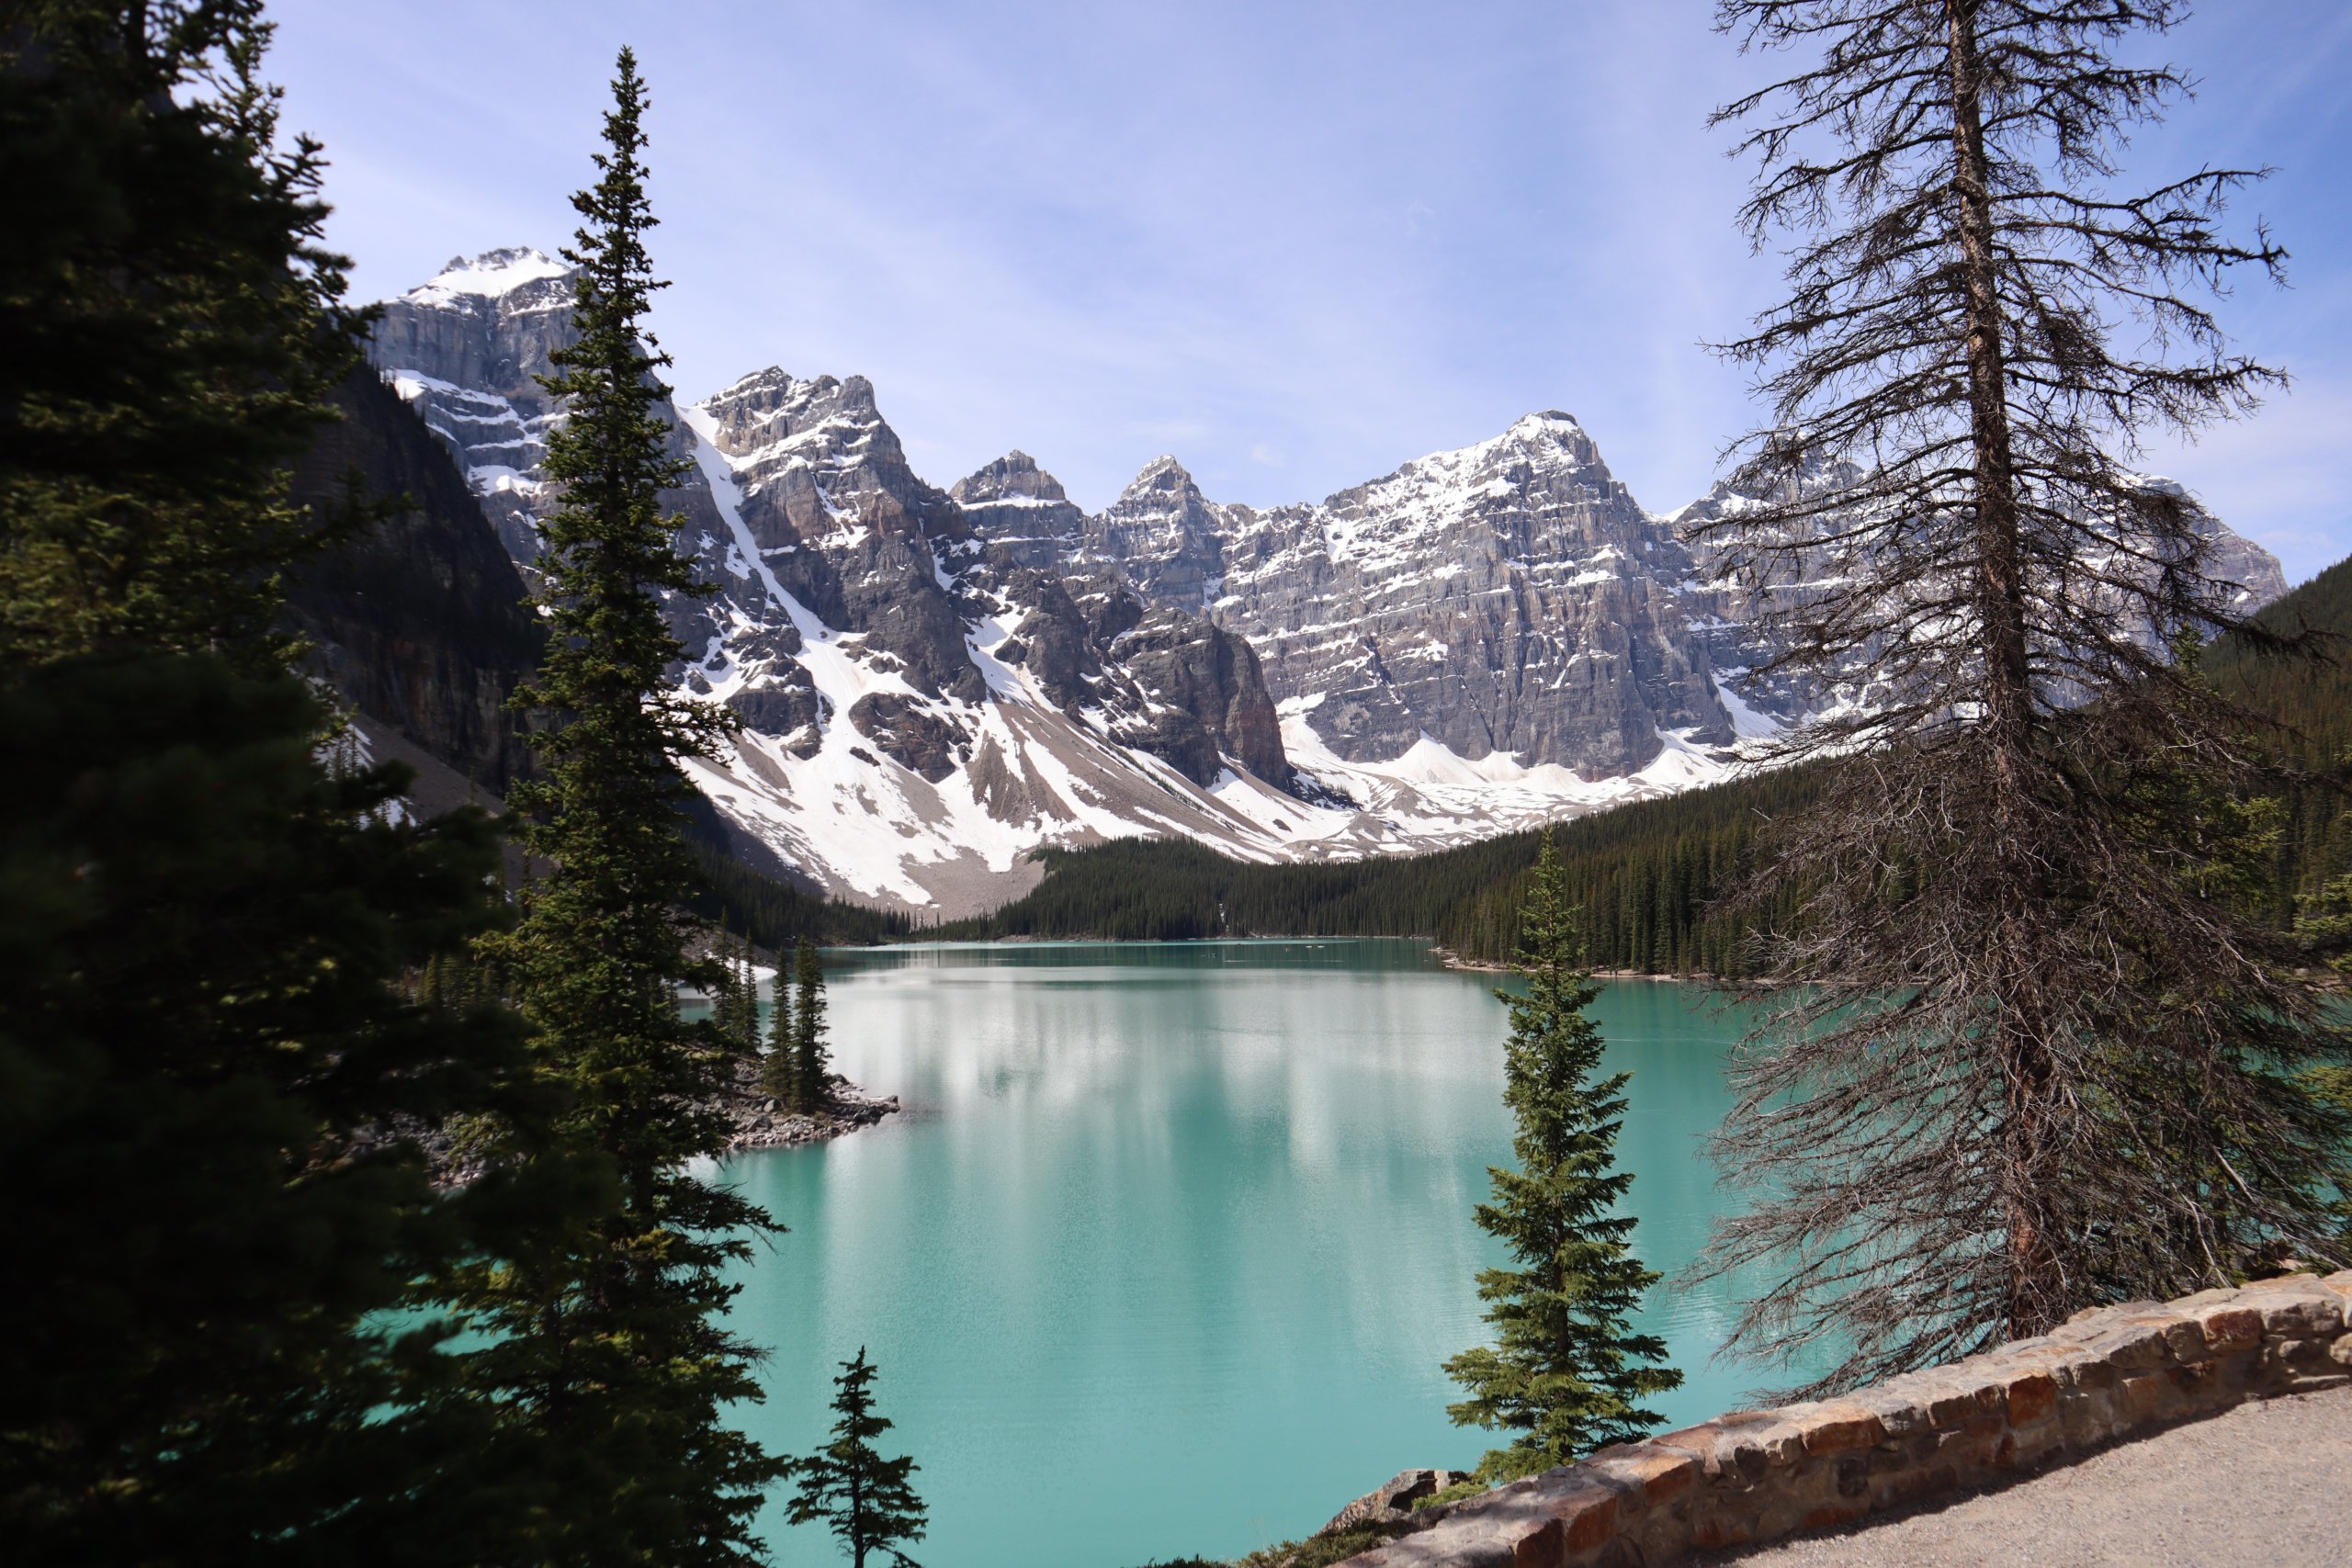 Image of lake and mountains in Canada. Pexels credit.